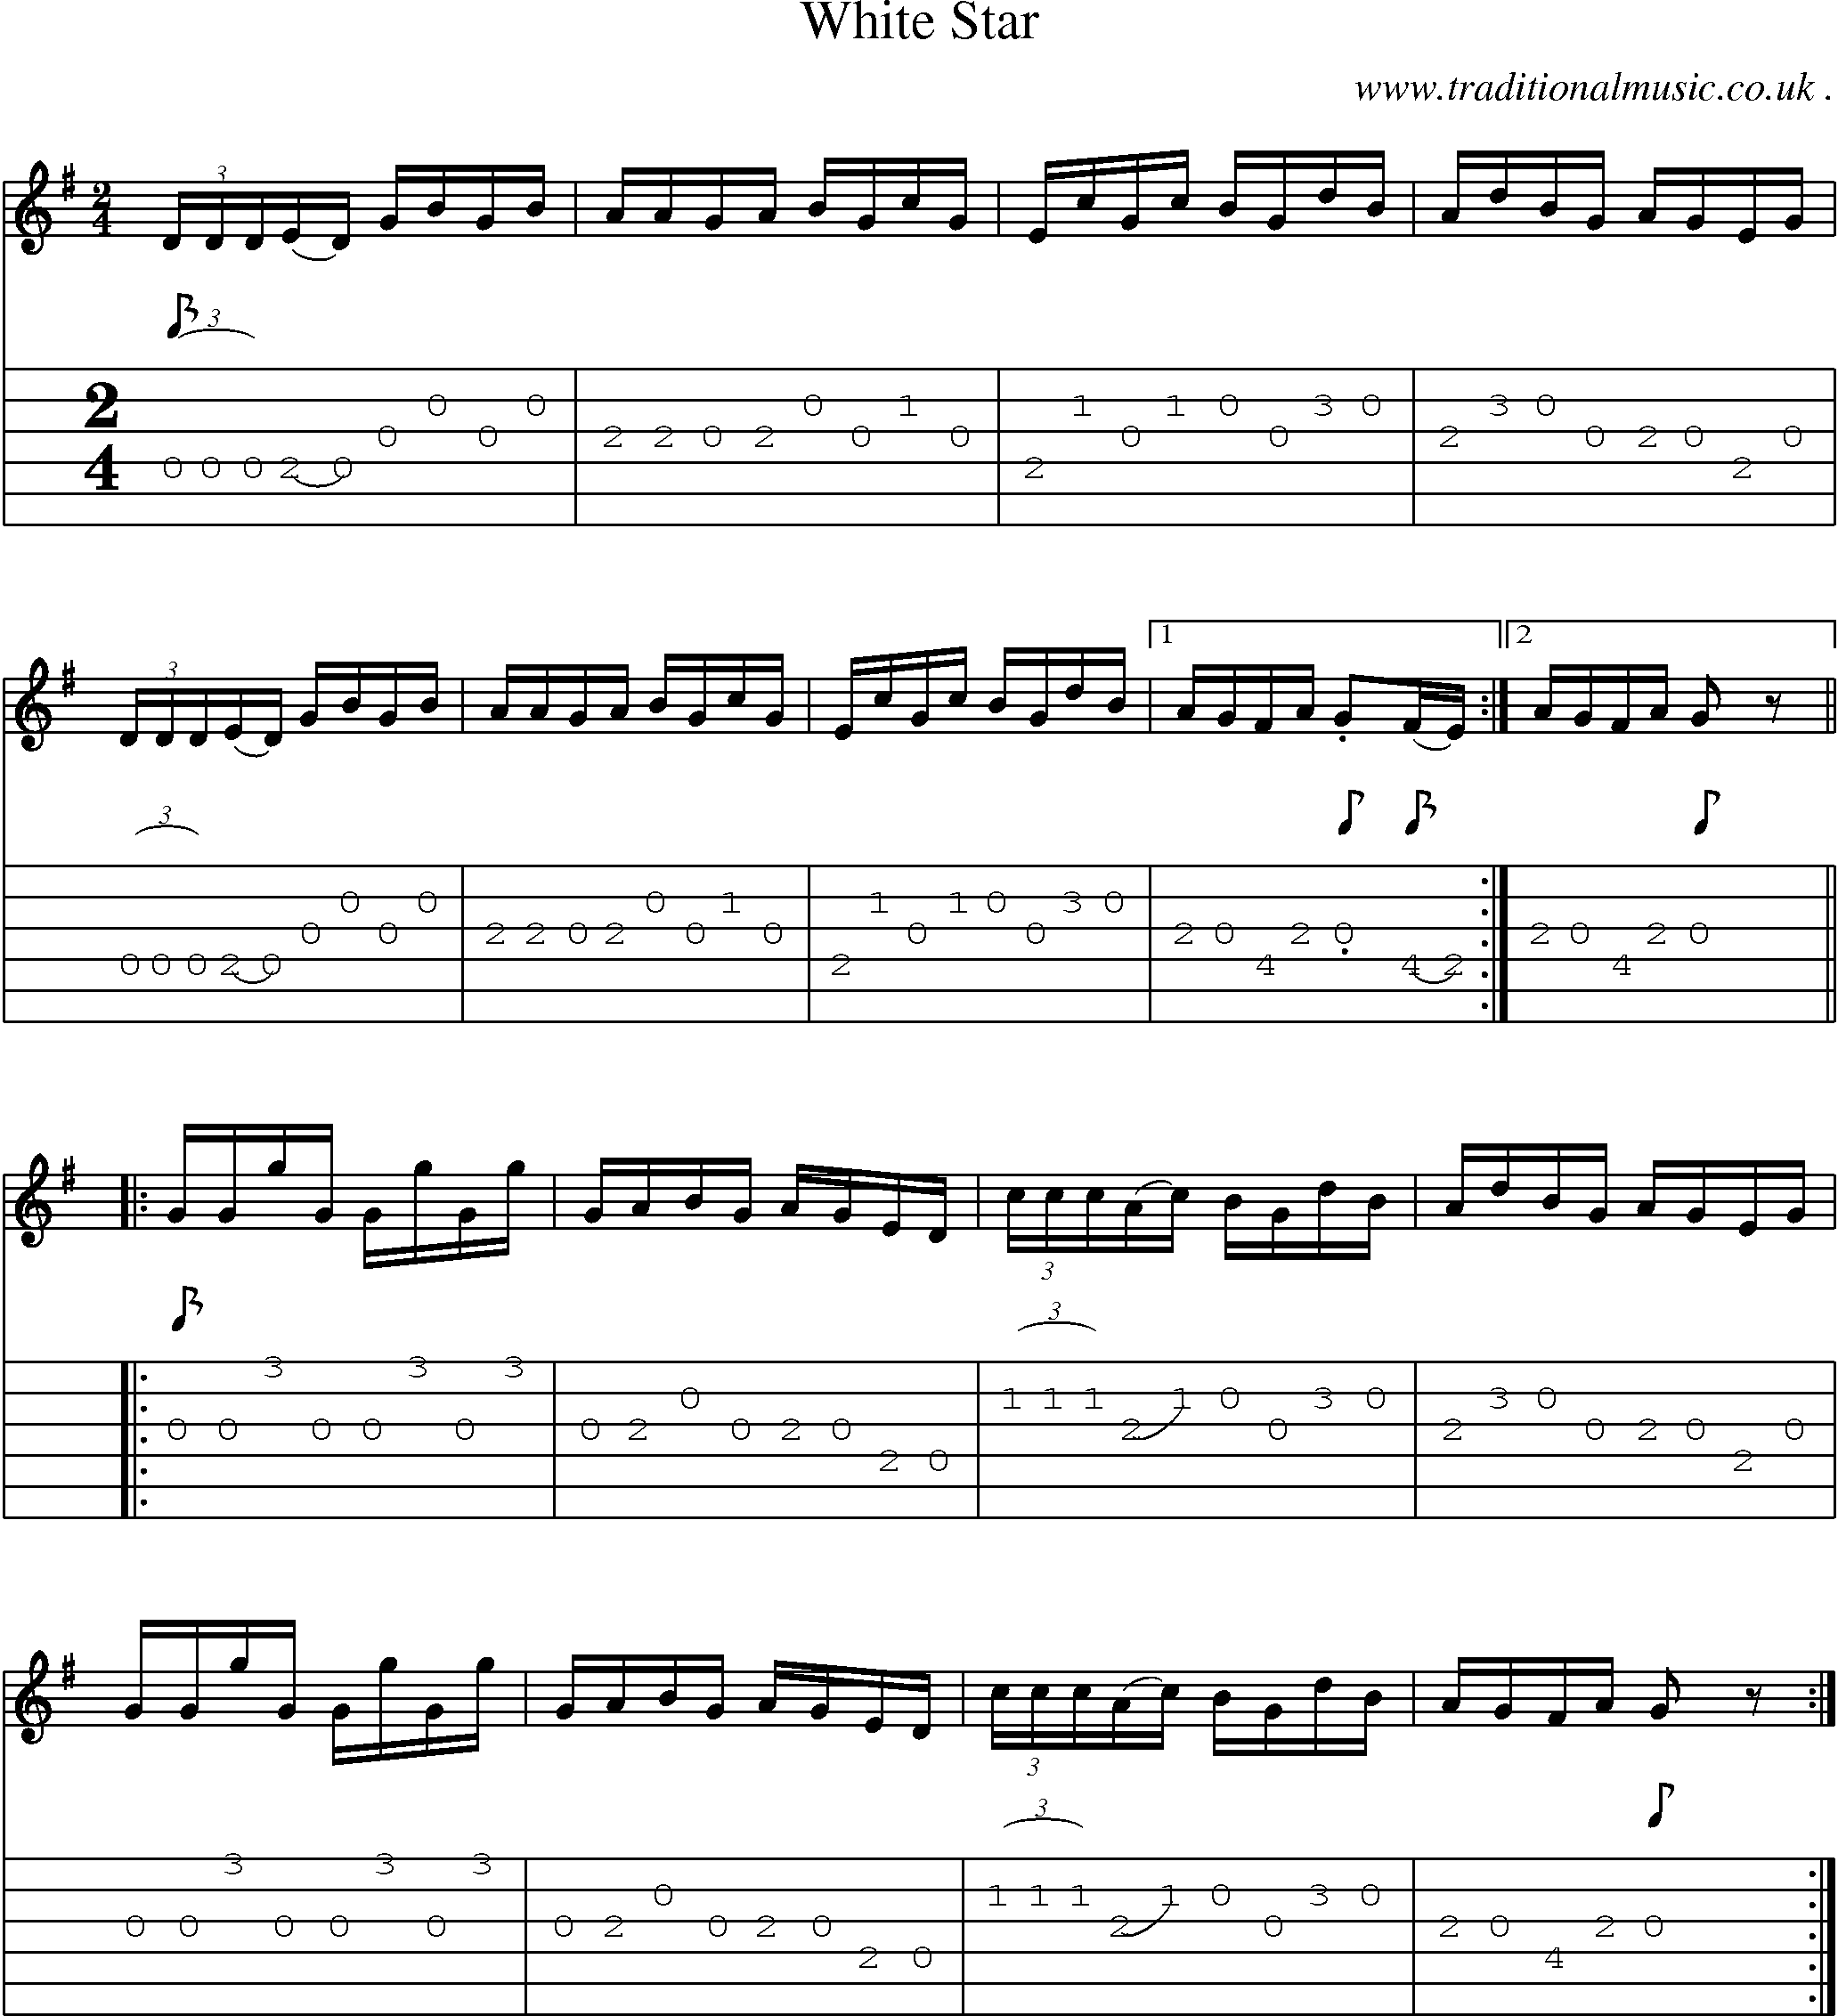 Sheet-Music and Guitar Tabs for White Star